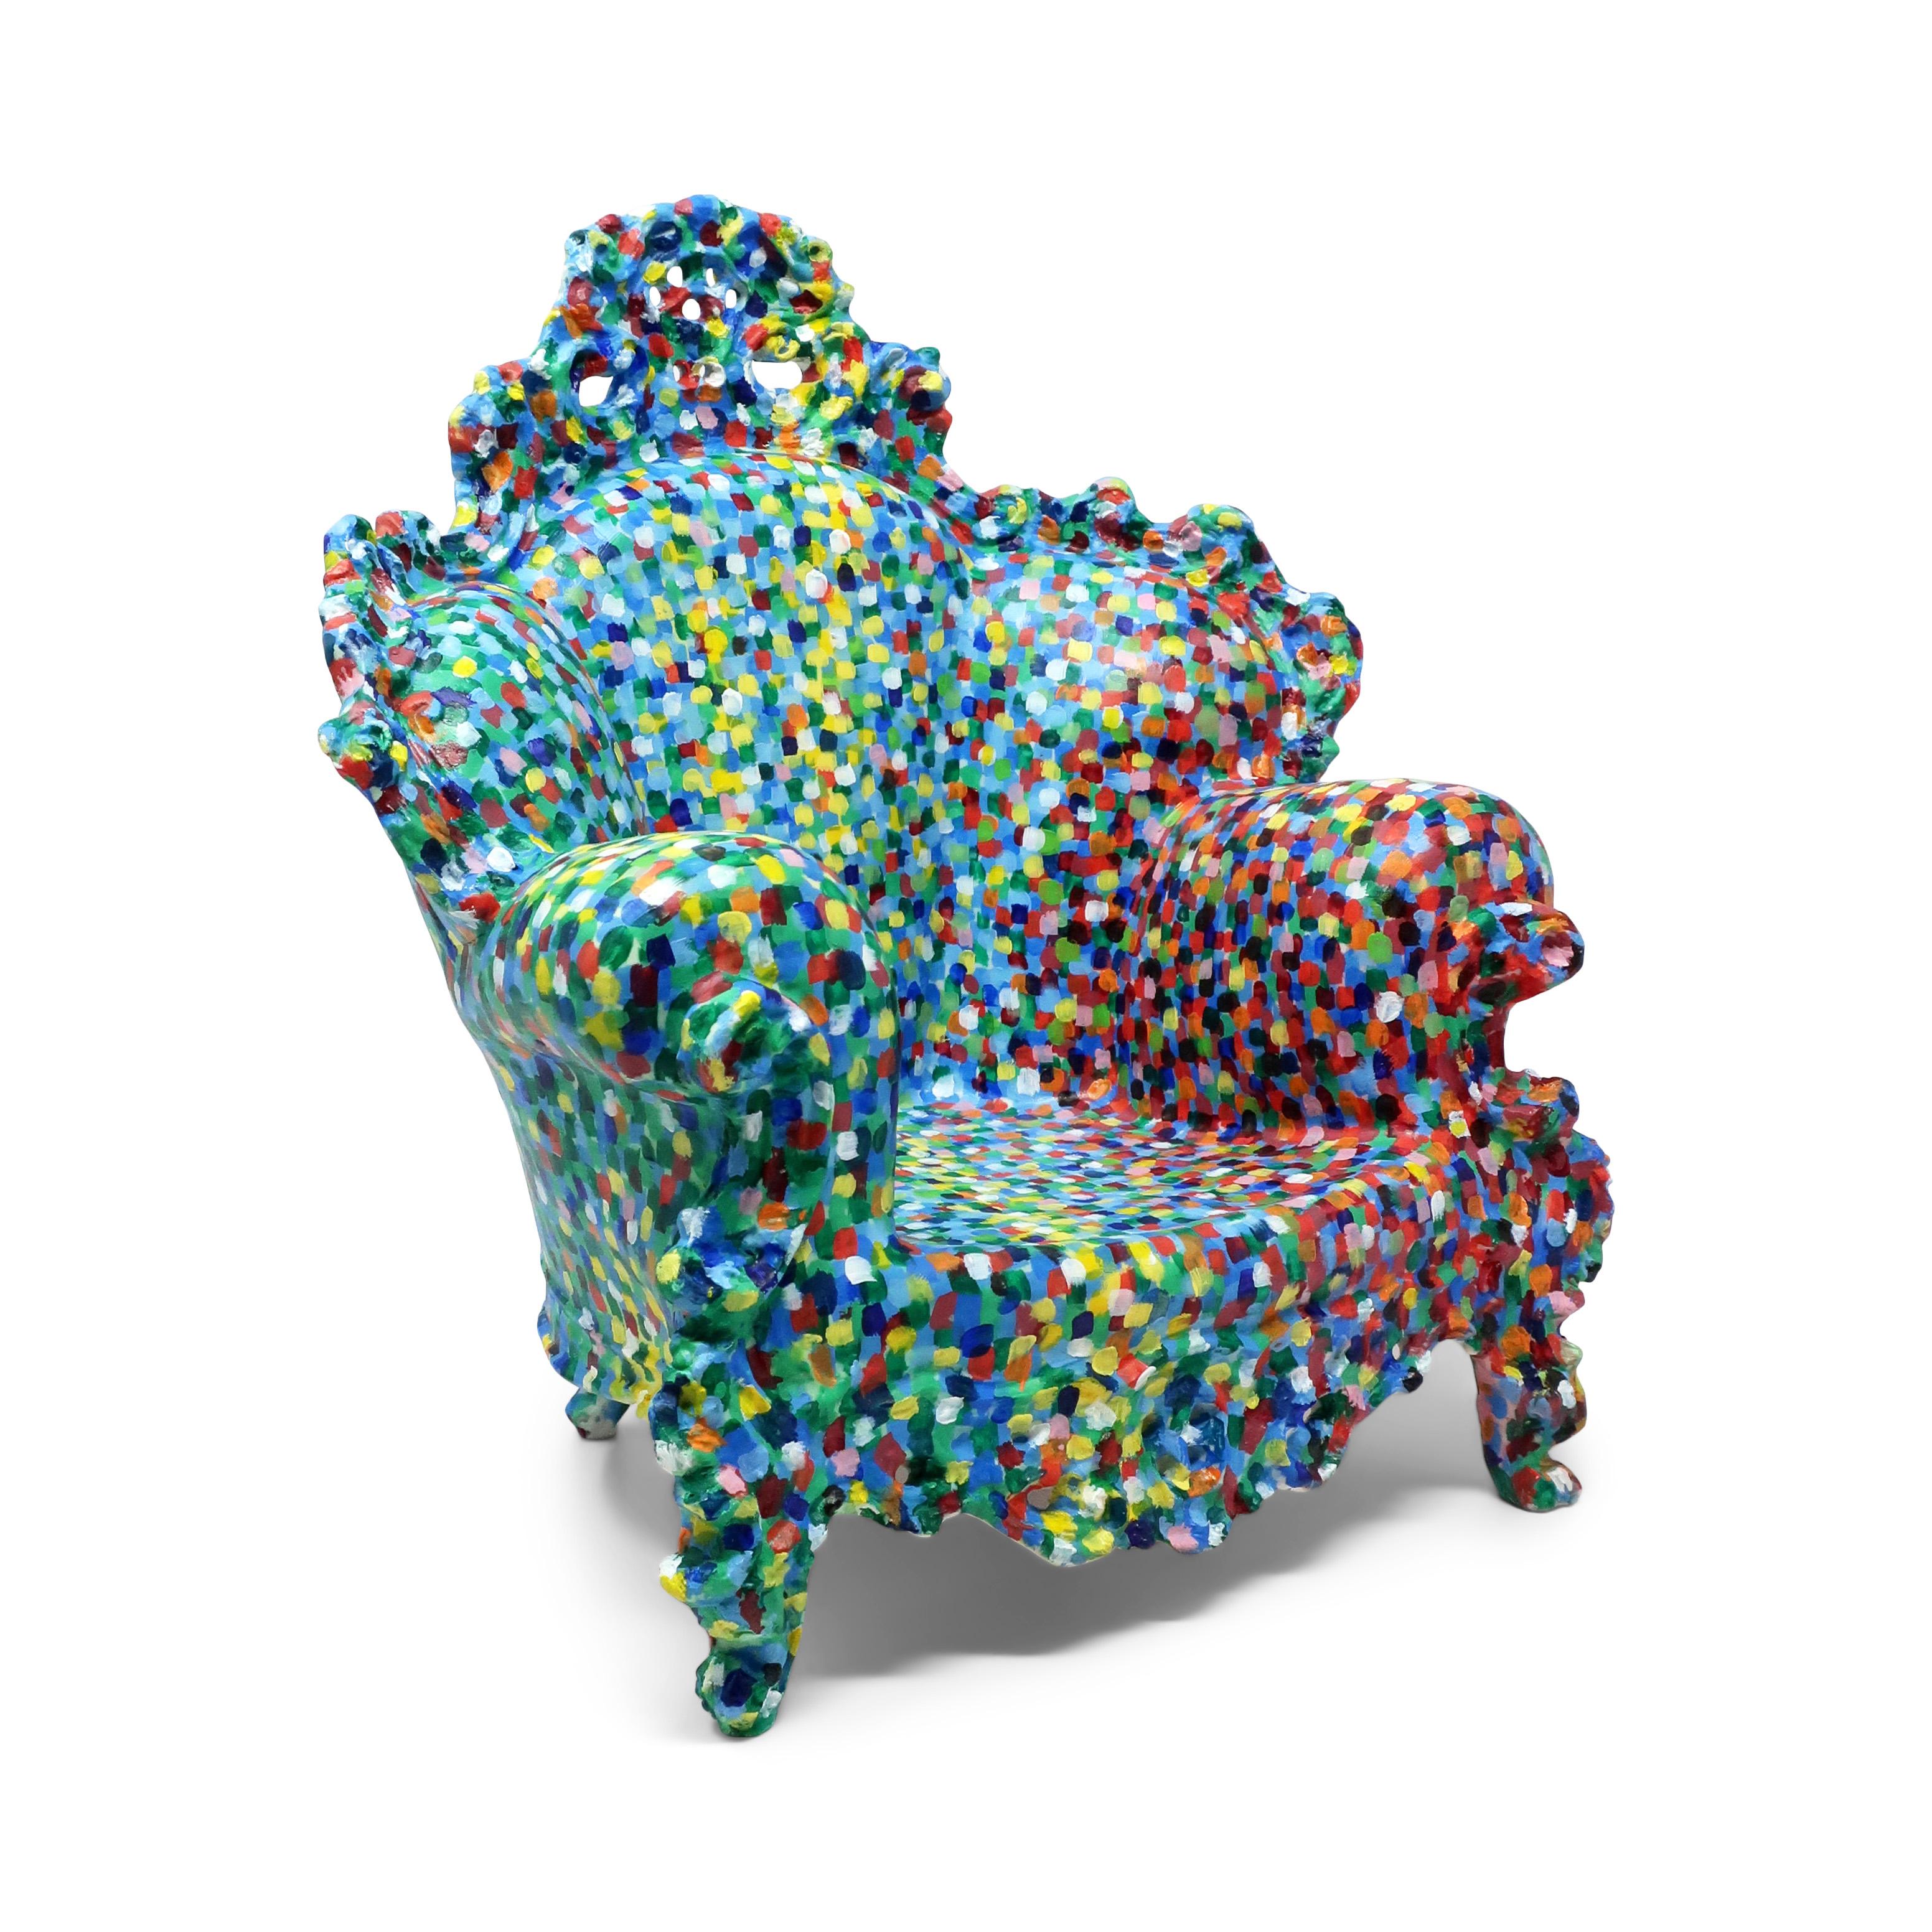 An incredible hand-painted porcelain 1:4.5 scale version of Alessandro Mendini's iconic 1978 Poltrona di Proust chair design produced by Edition Vitra Design Museum in 1996. Originally intended to be an edition of 500, only 50-100 were produced